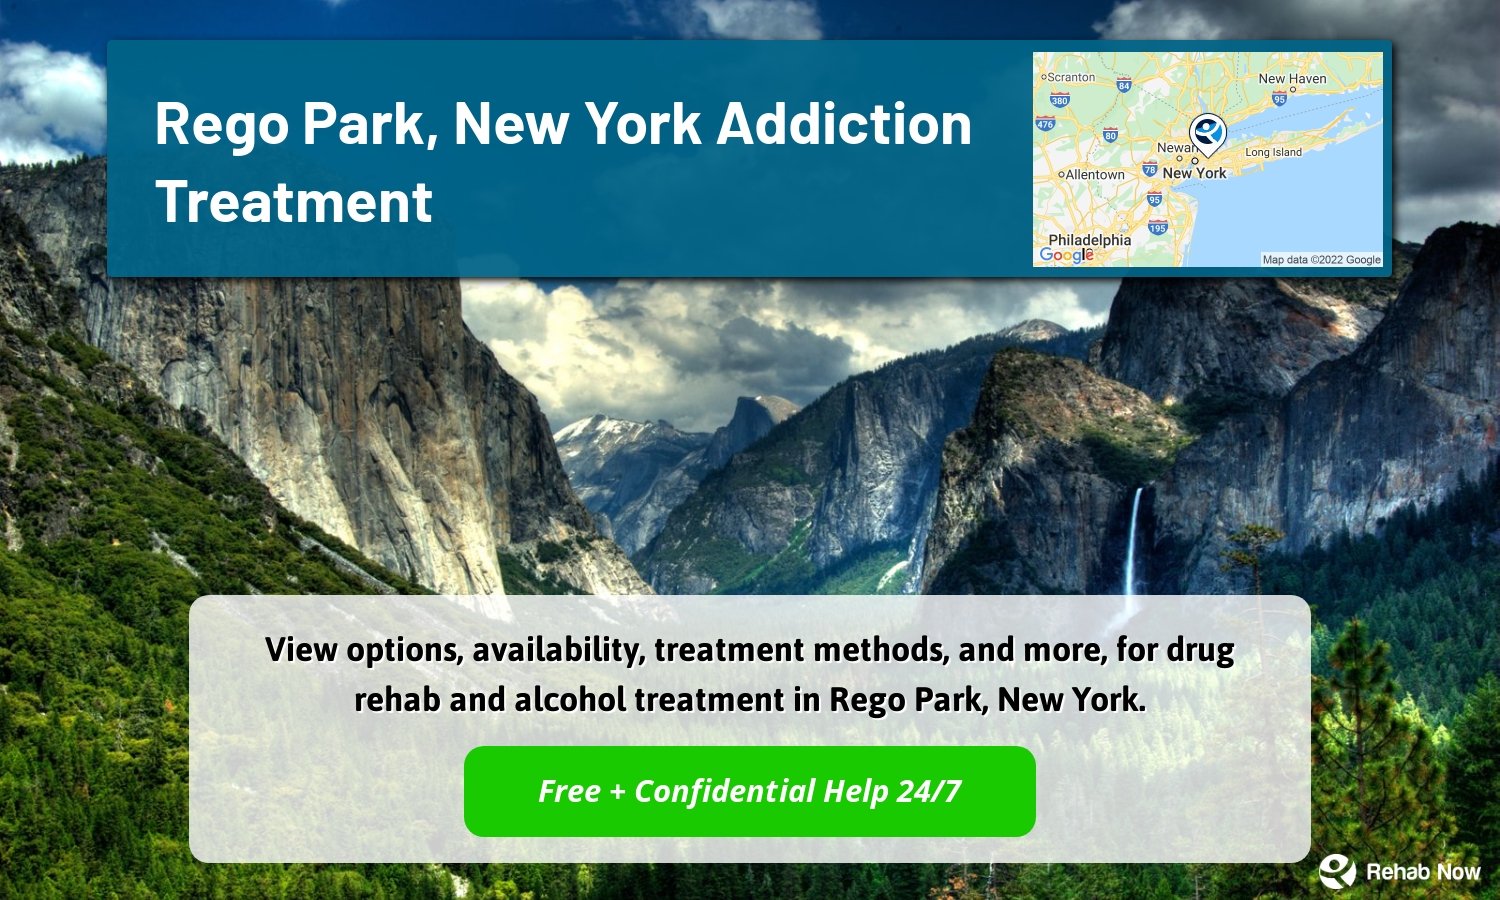 View options, availability, treatment methods, and more, for drug rehab and alcohol treatment in Rego Park, New York.